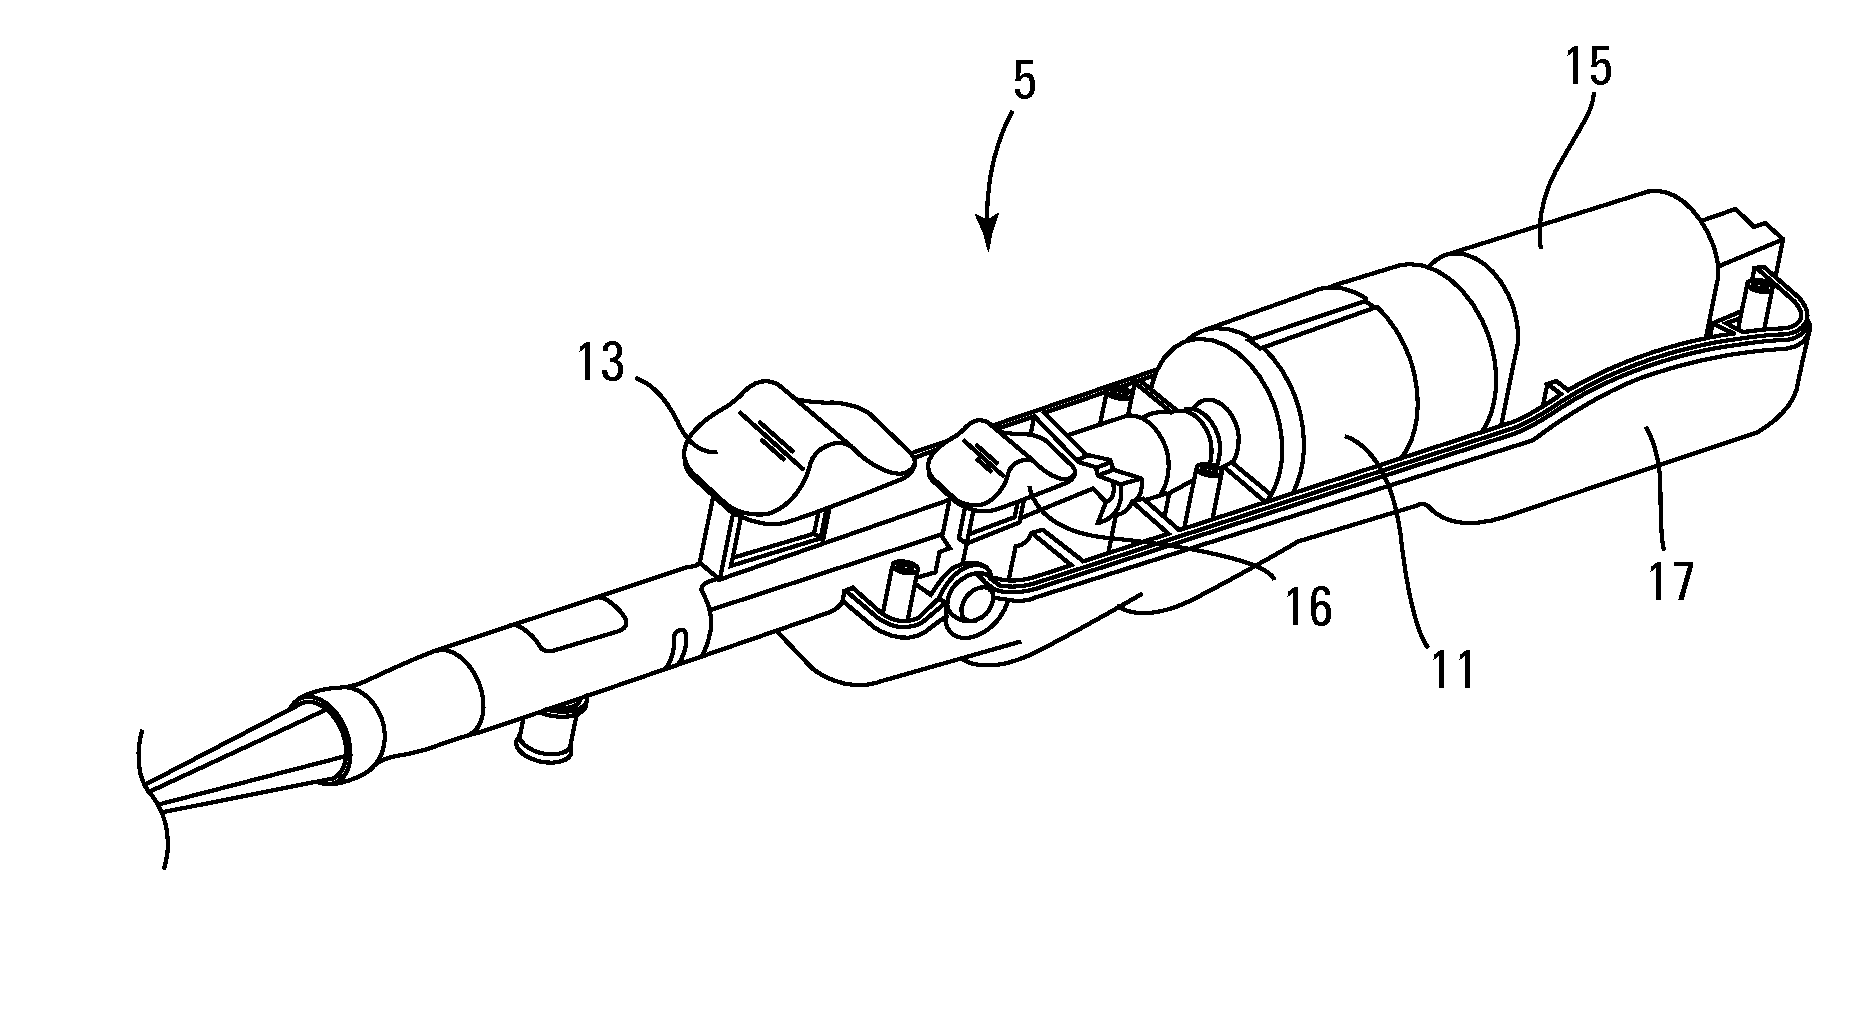 Material removal device and method of use